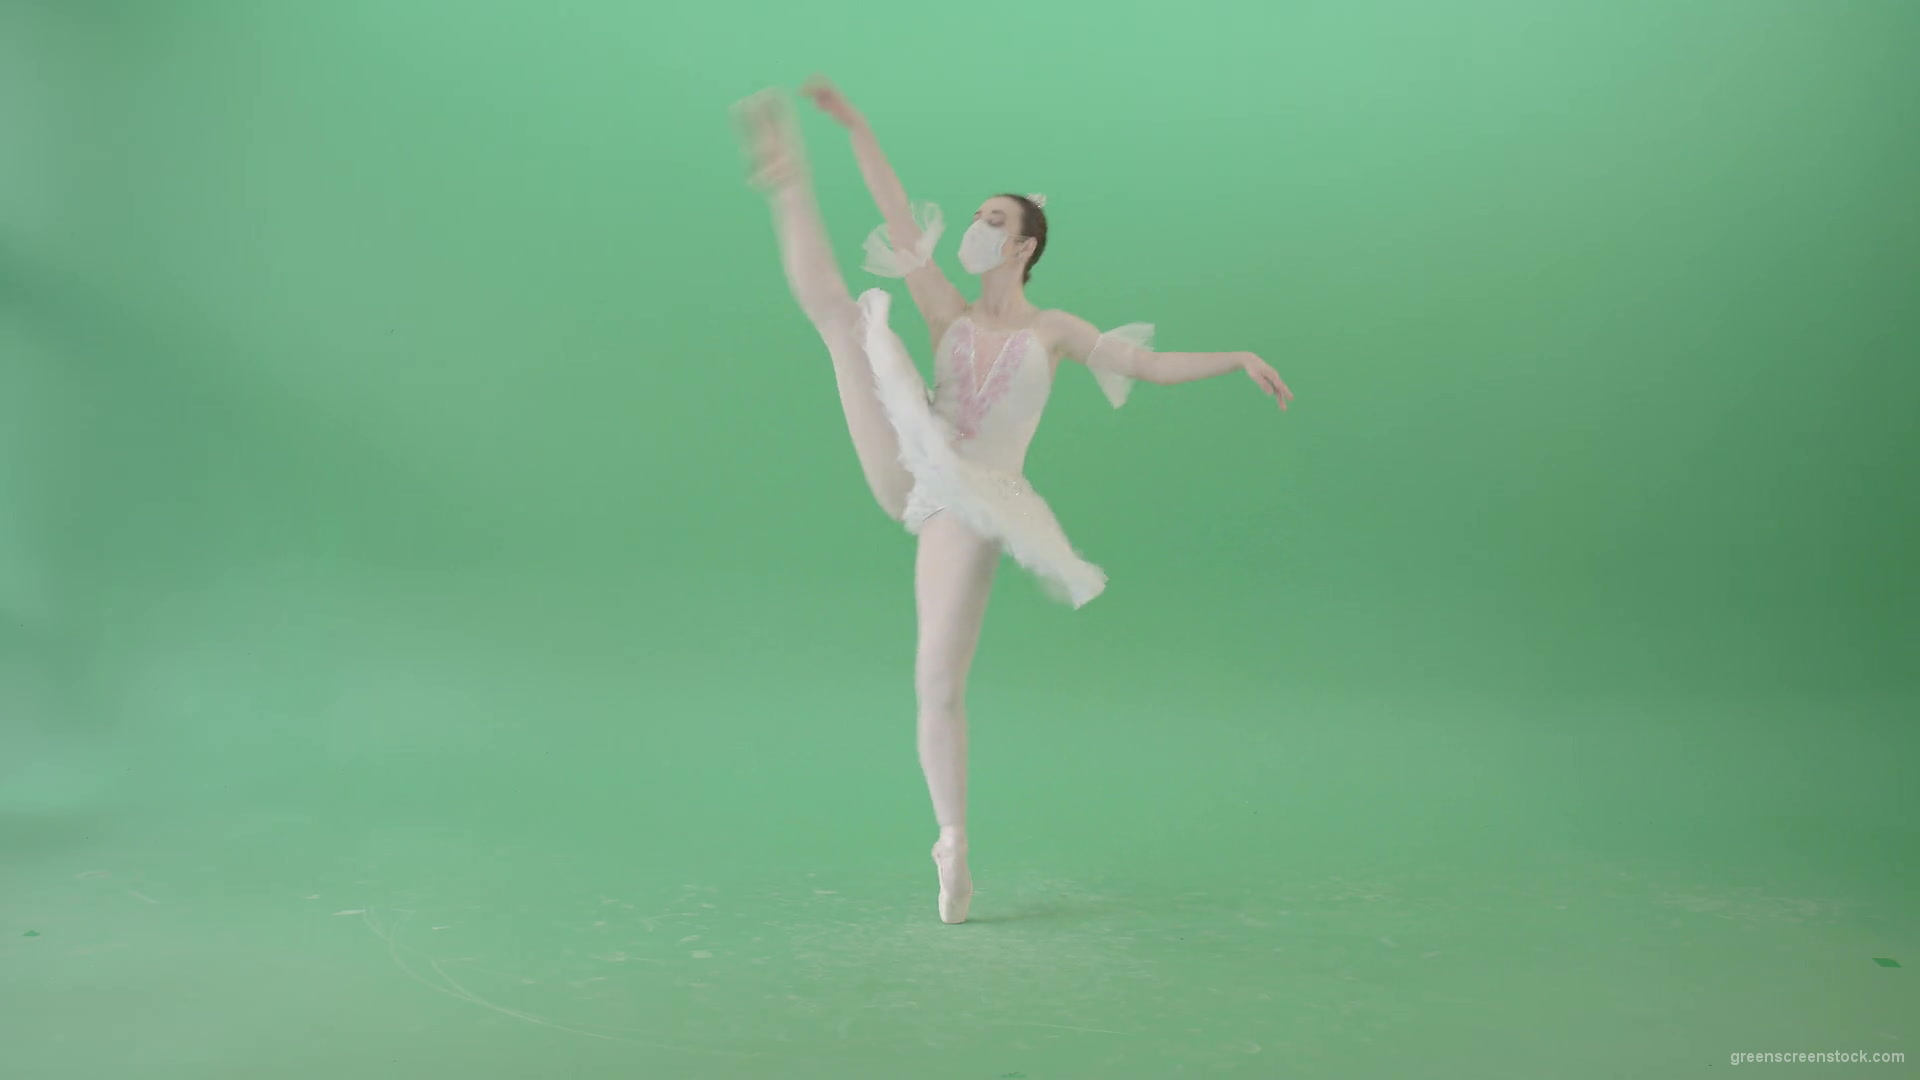 Dancing-ballerina-Girl-in-Ballet-Dress-and-Covid19-mask-dancing-isolated-on-green-screen-4K-Video-Footage--1920_002 Green Screen Stock